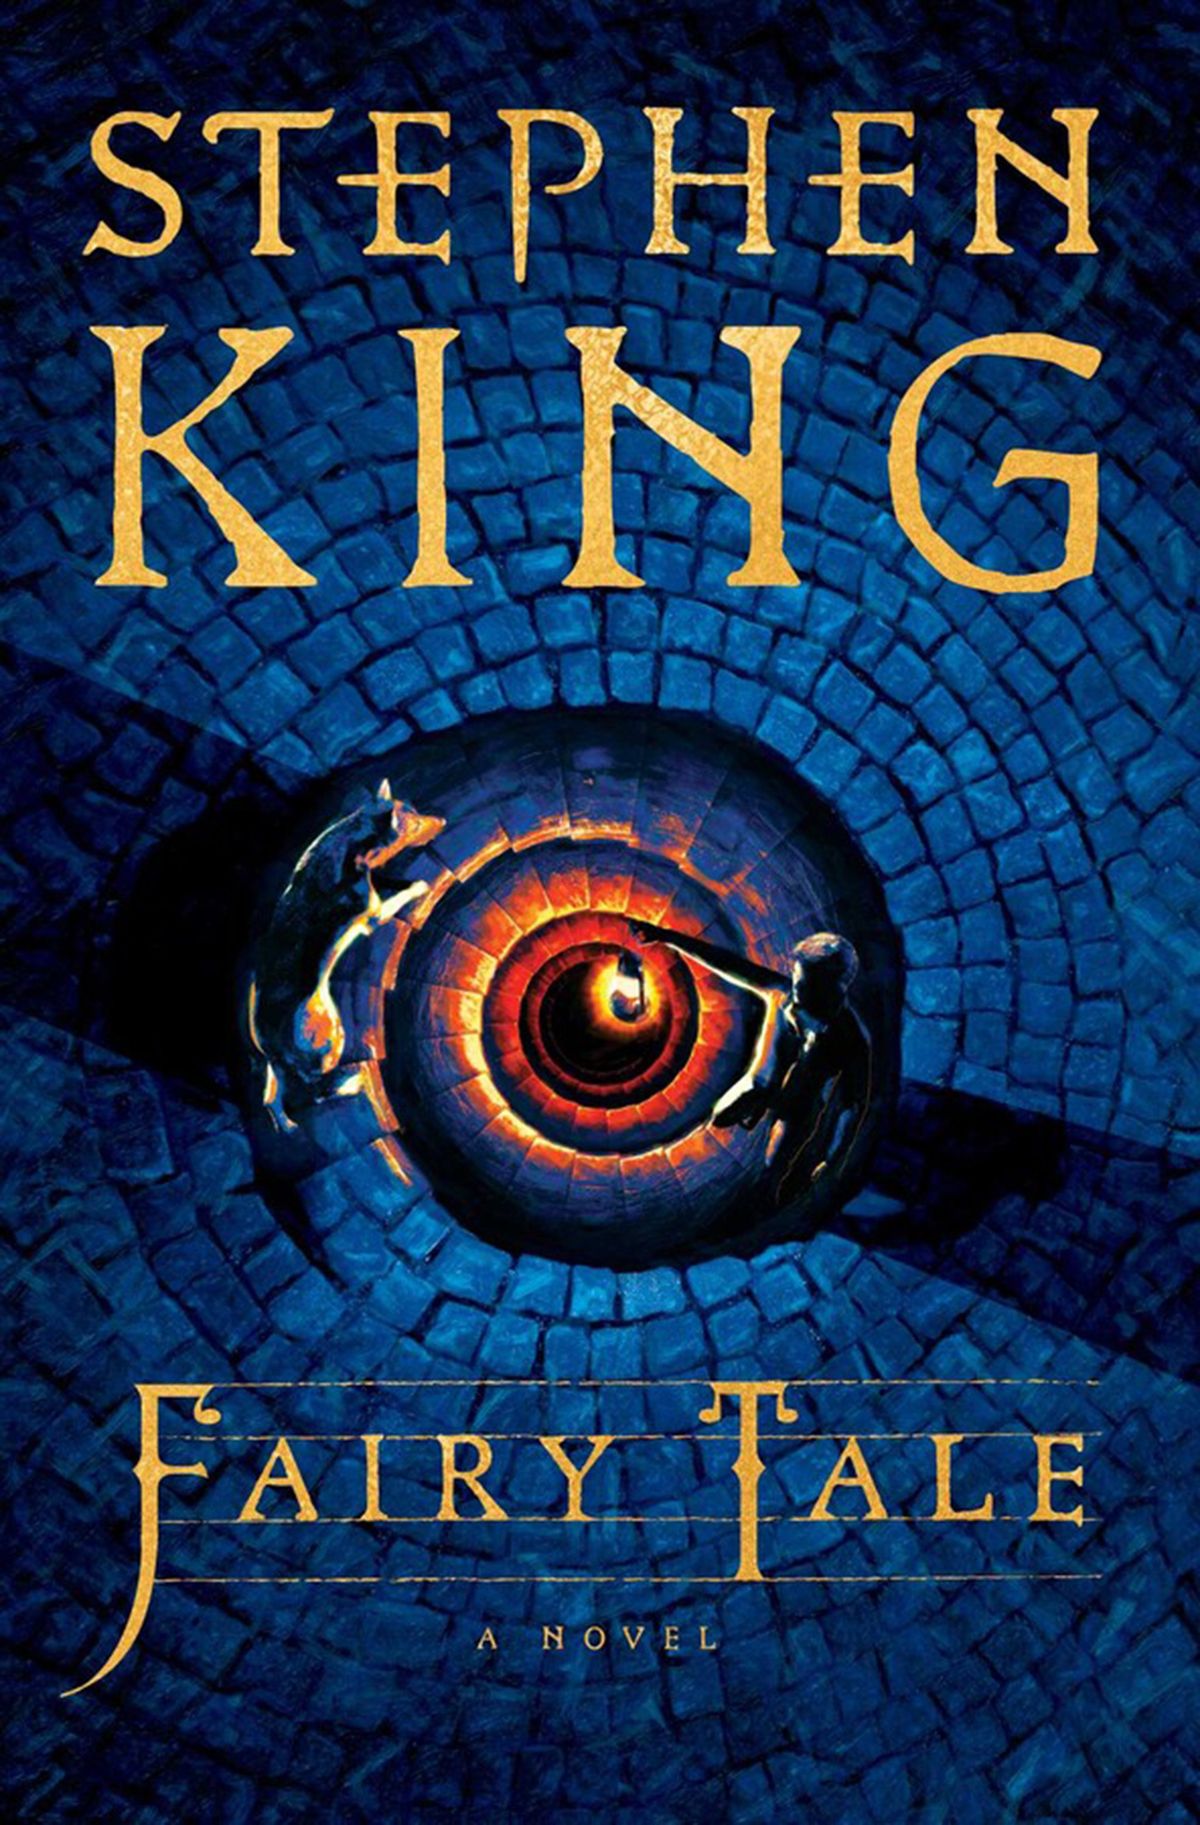 "Fairy Tale" by Stephen King. (Simon & Schuster/TNS)  (Simon & Schuster/TNS/TNS)